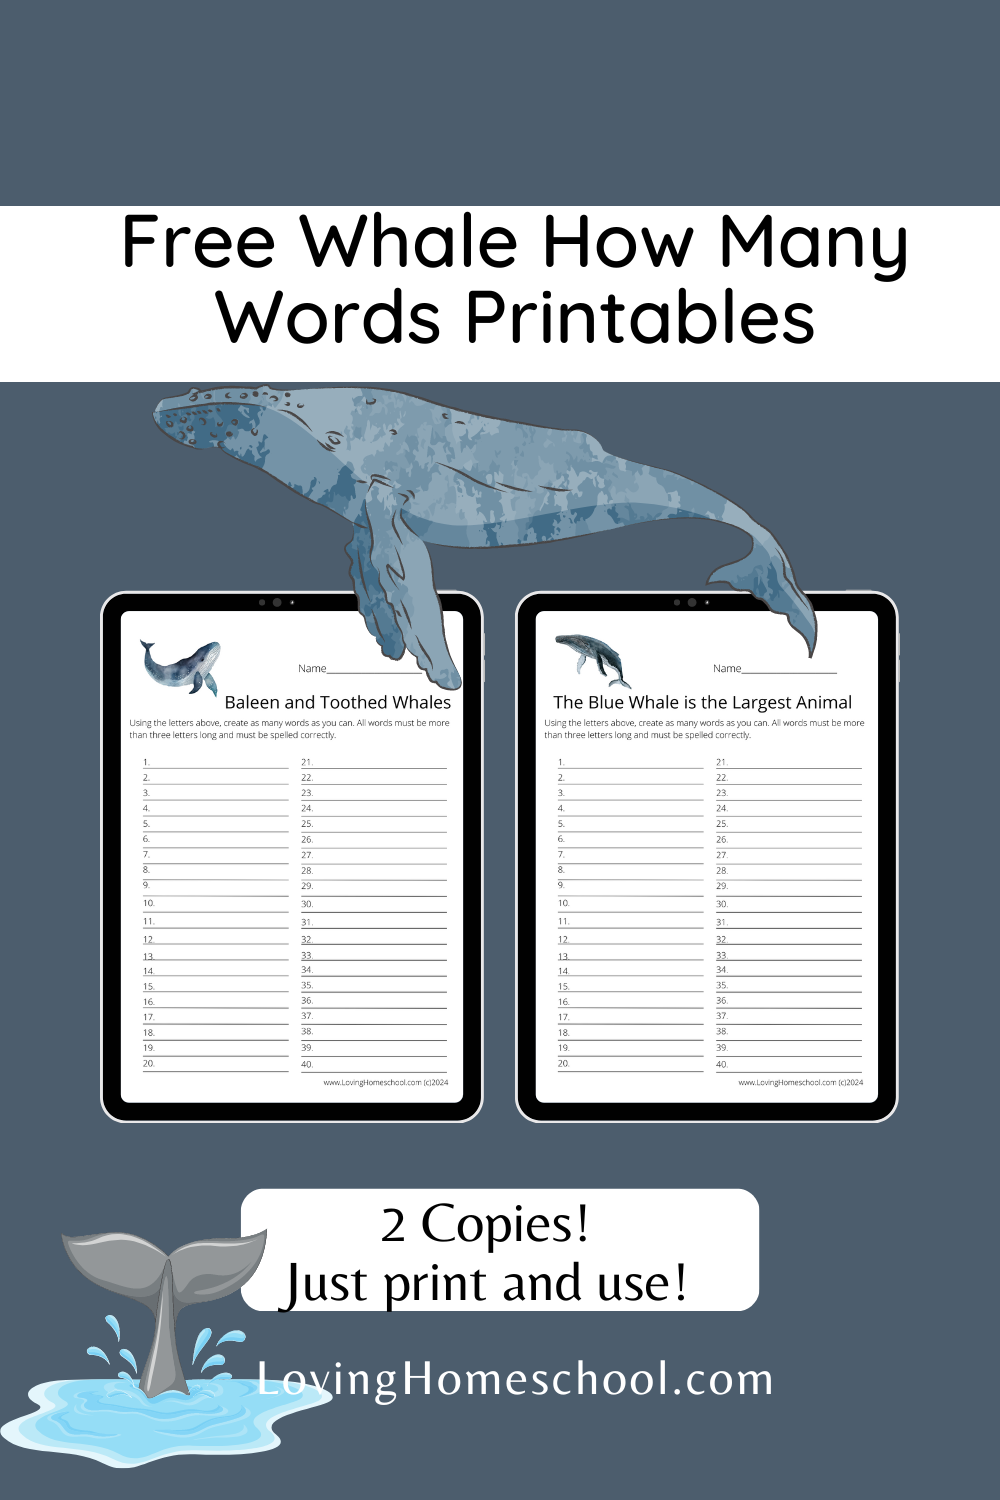 Free Whale How Many Words Printables